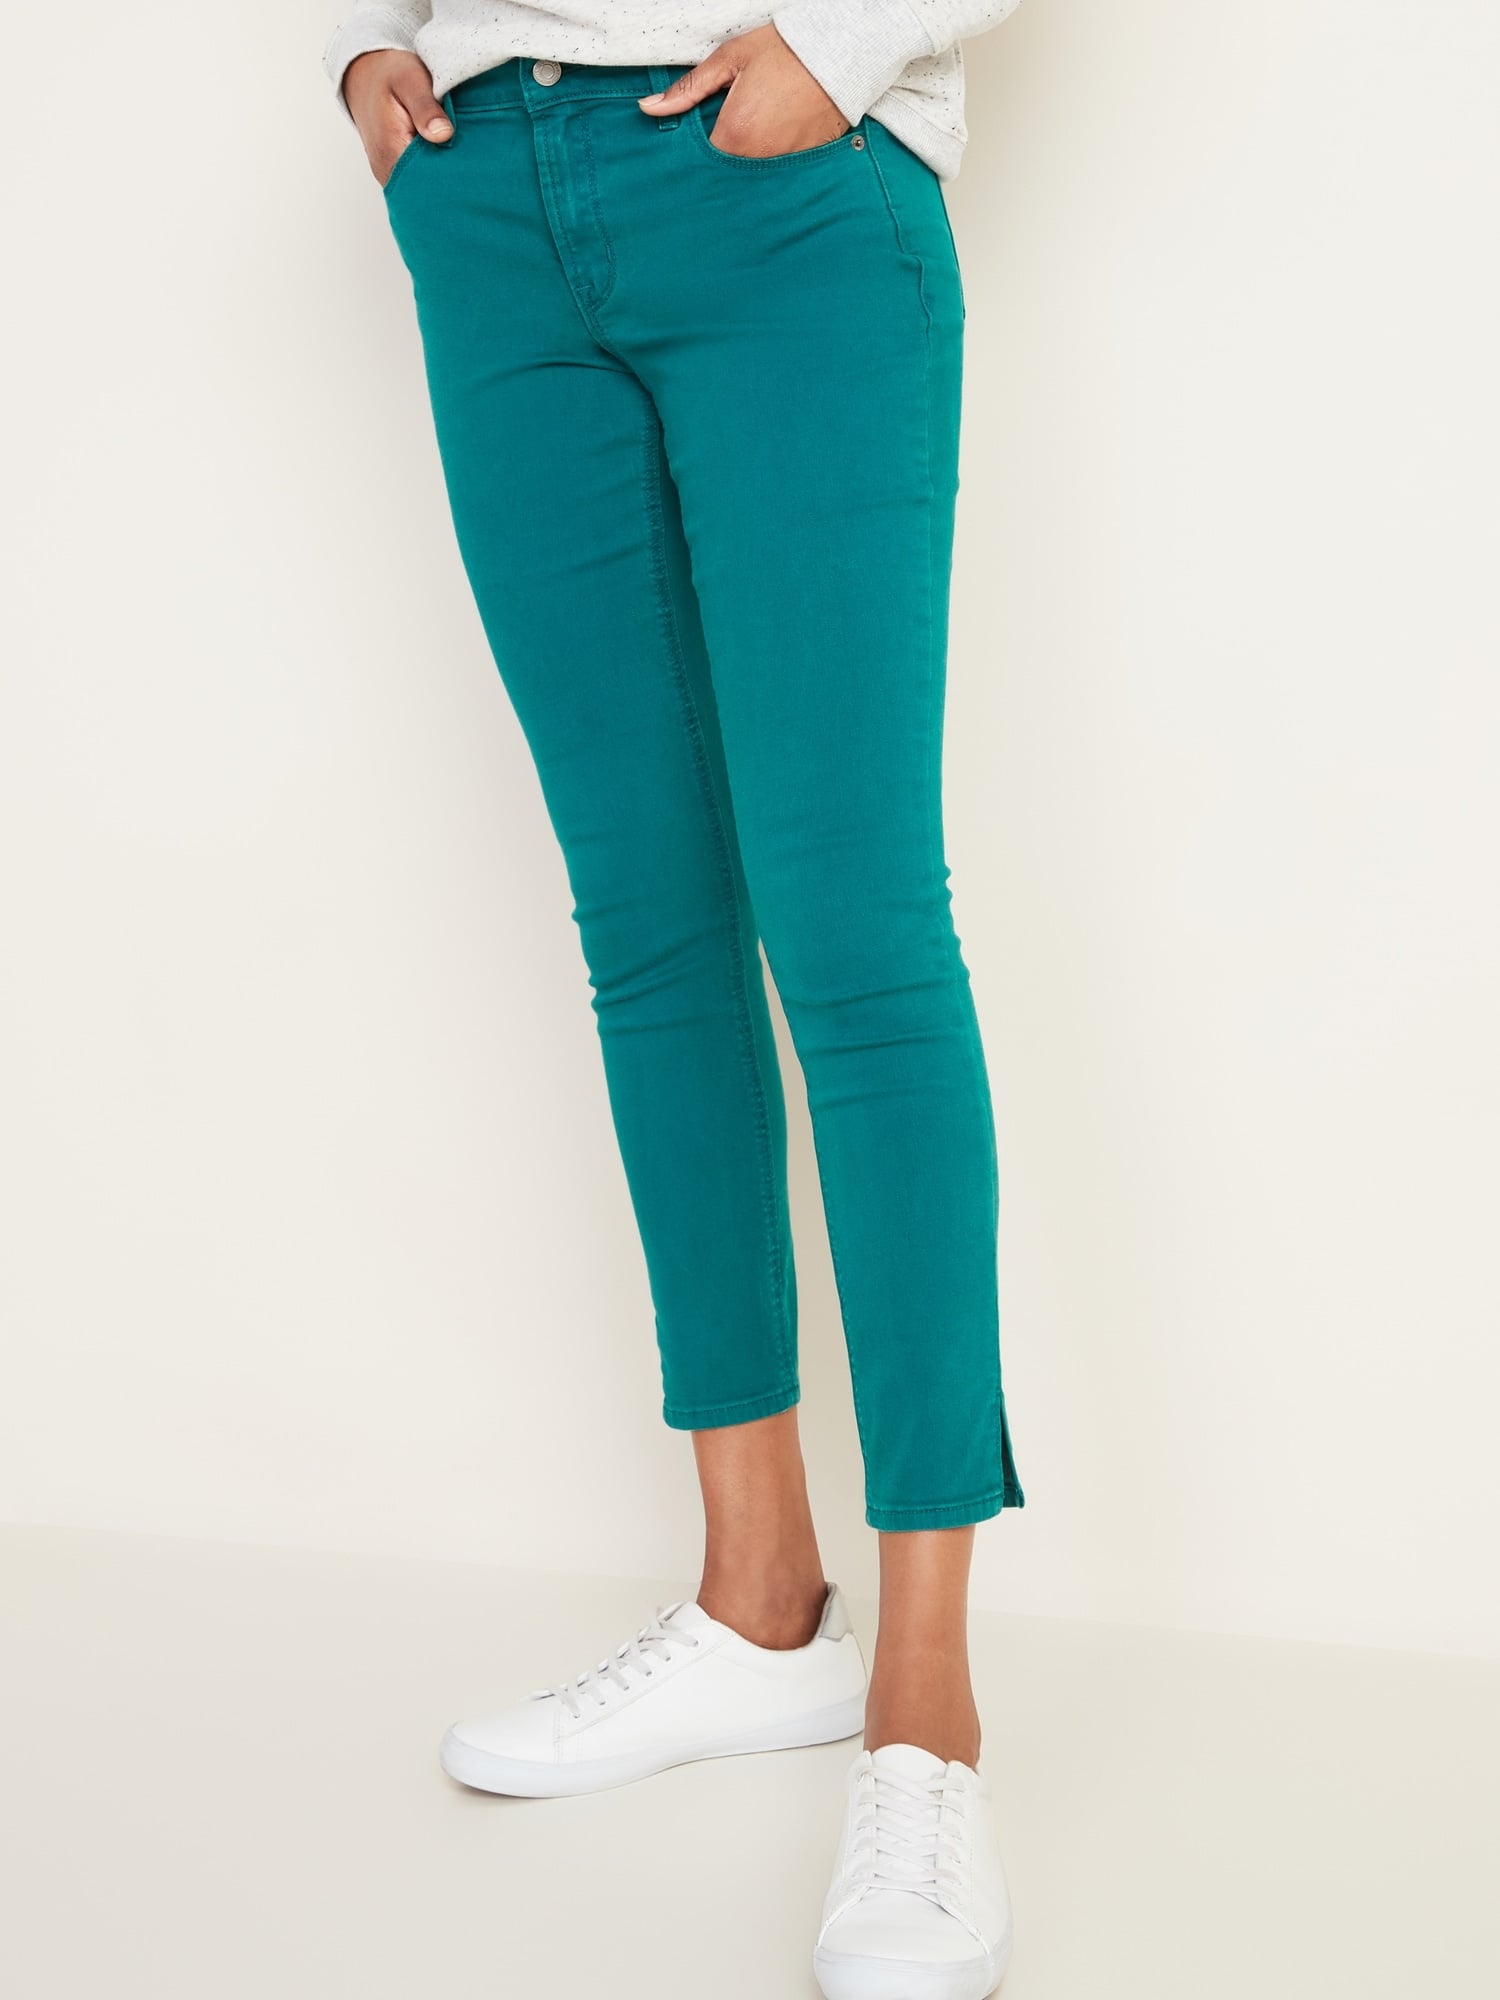 Best Brightly Coloured Jeans For Women at Old Navy